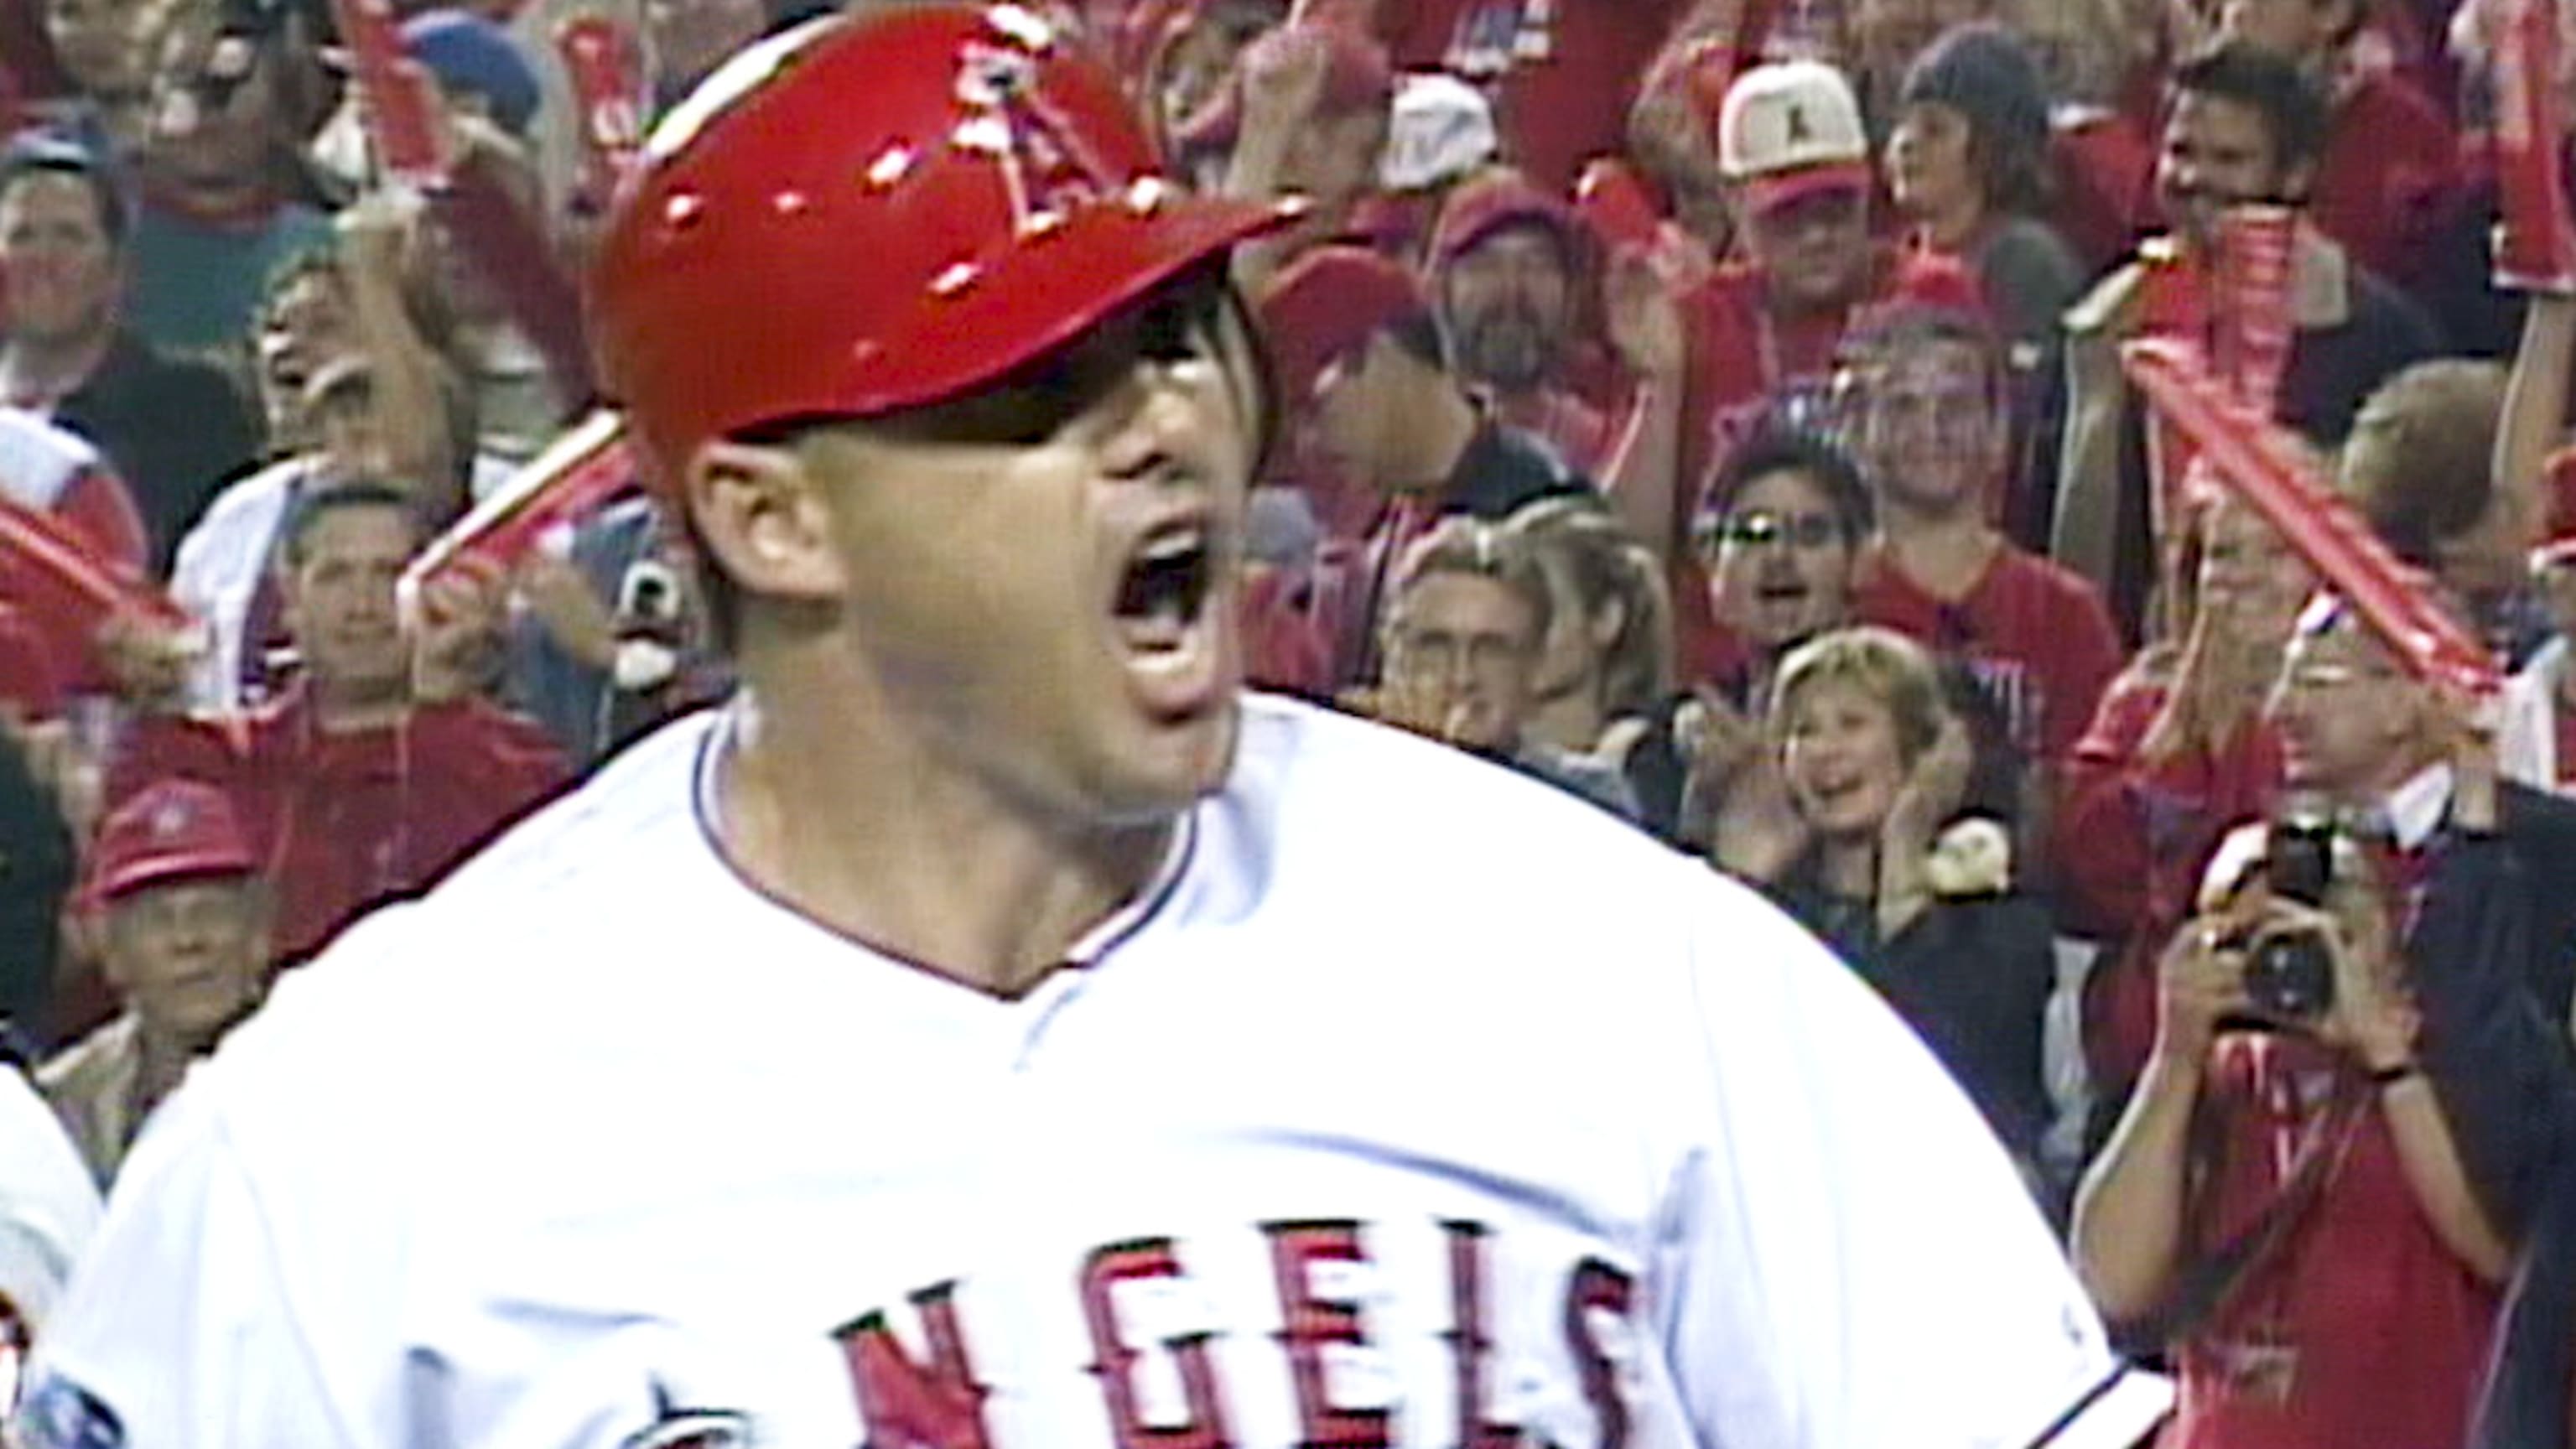 Mike Scioscia Angels' all-time best manager